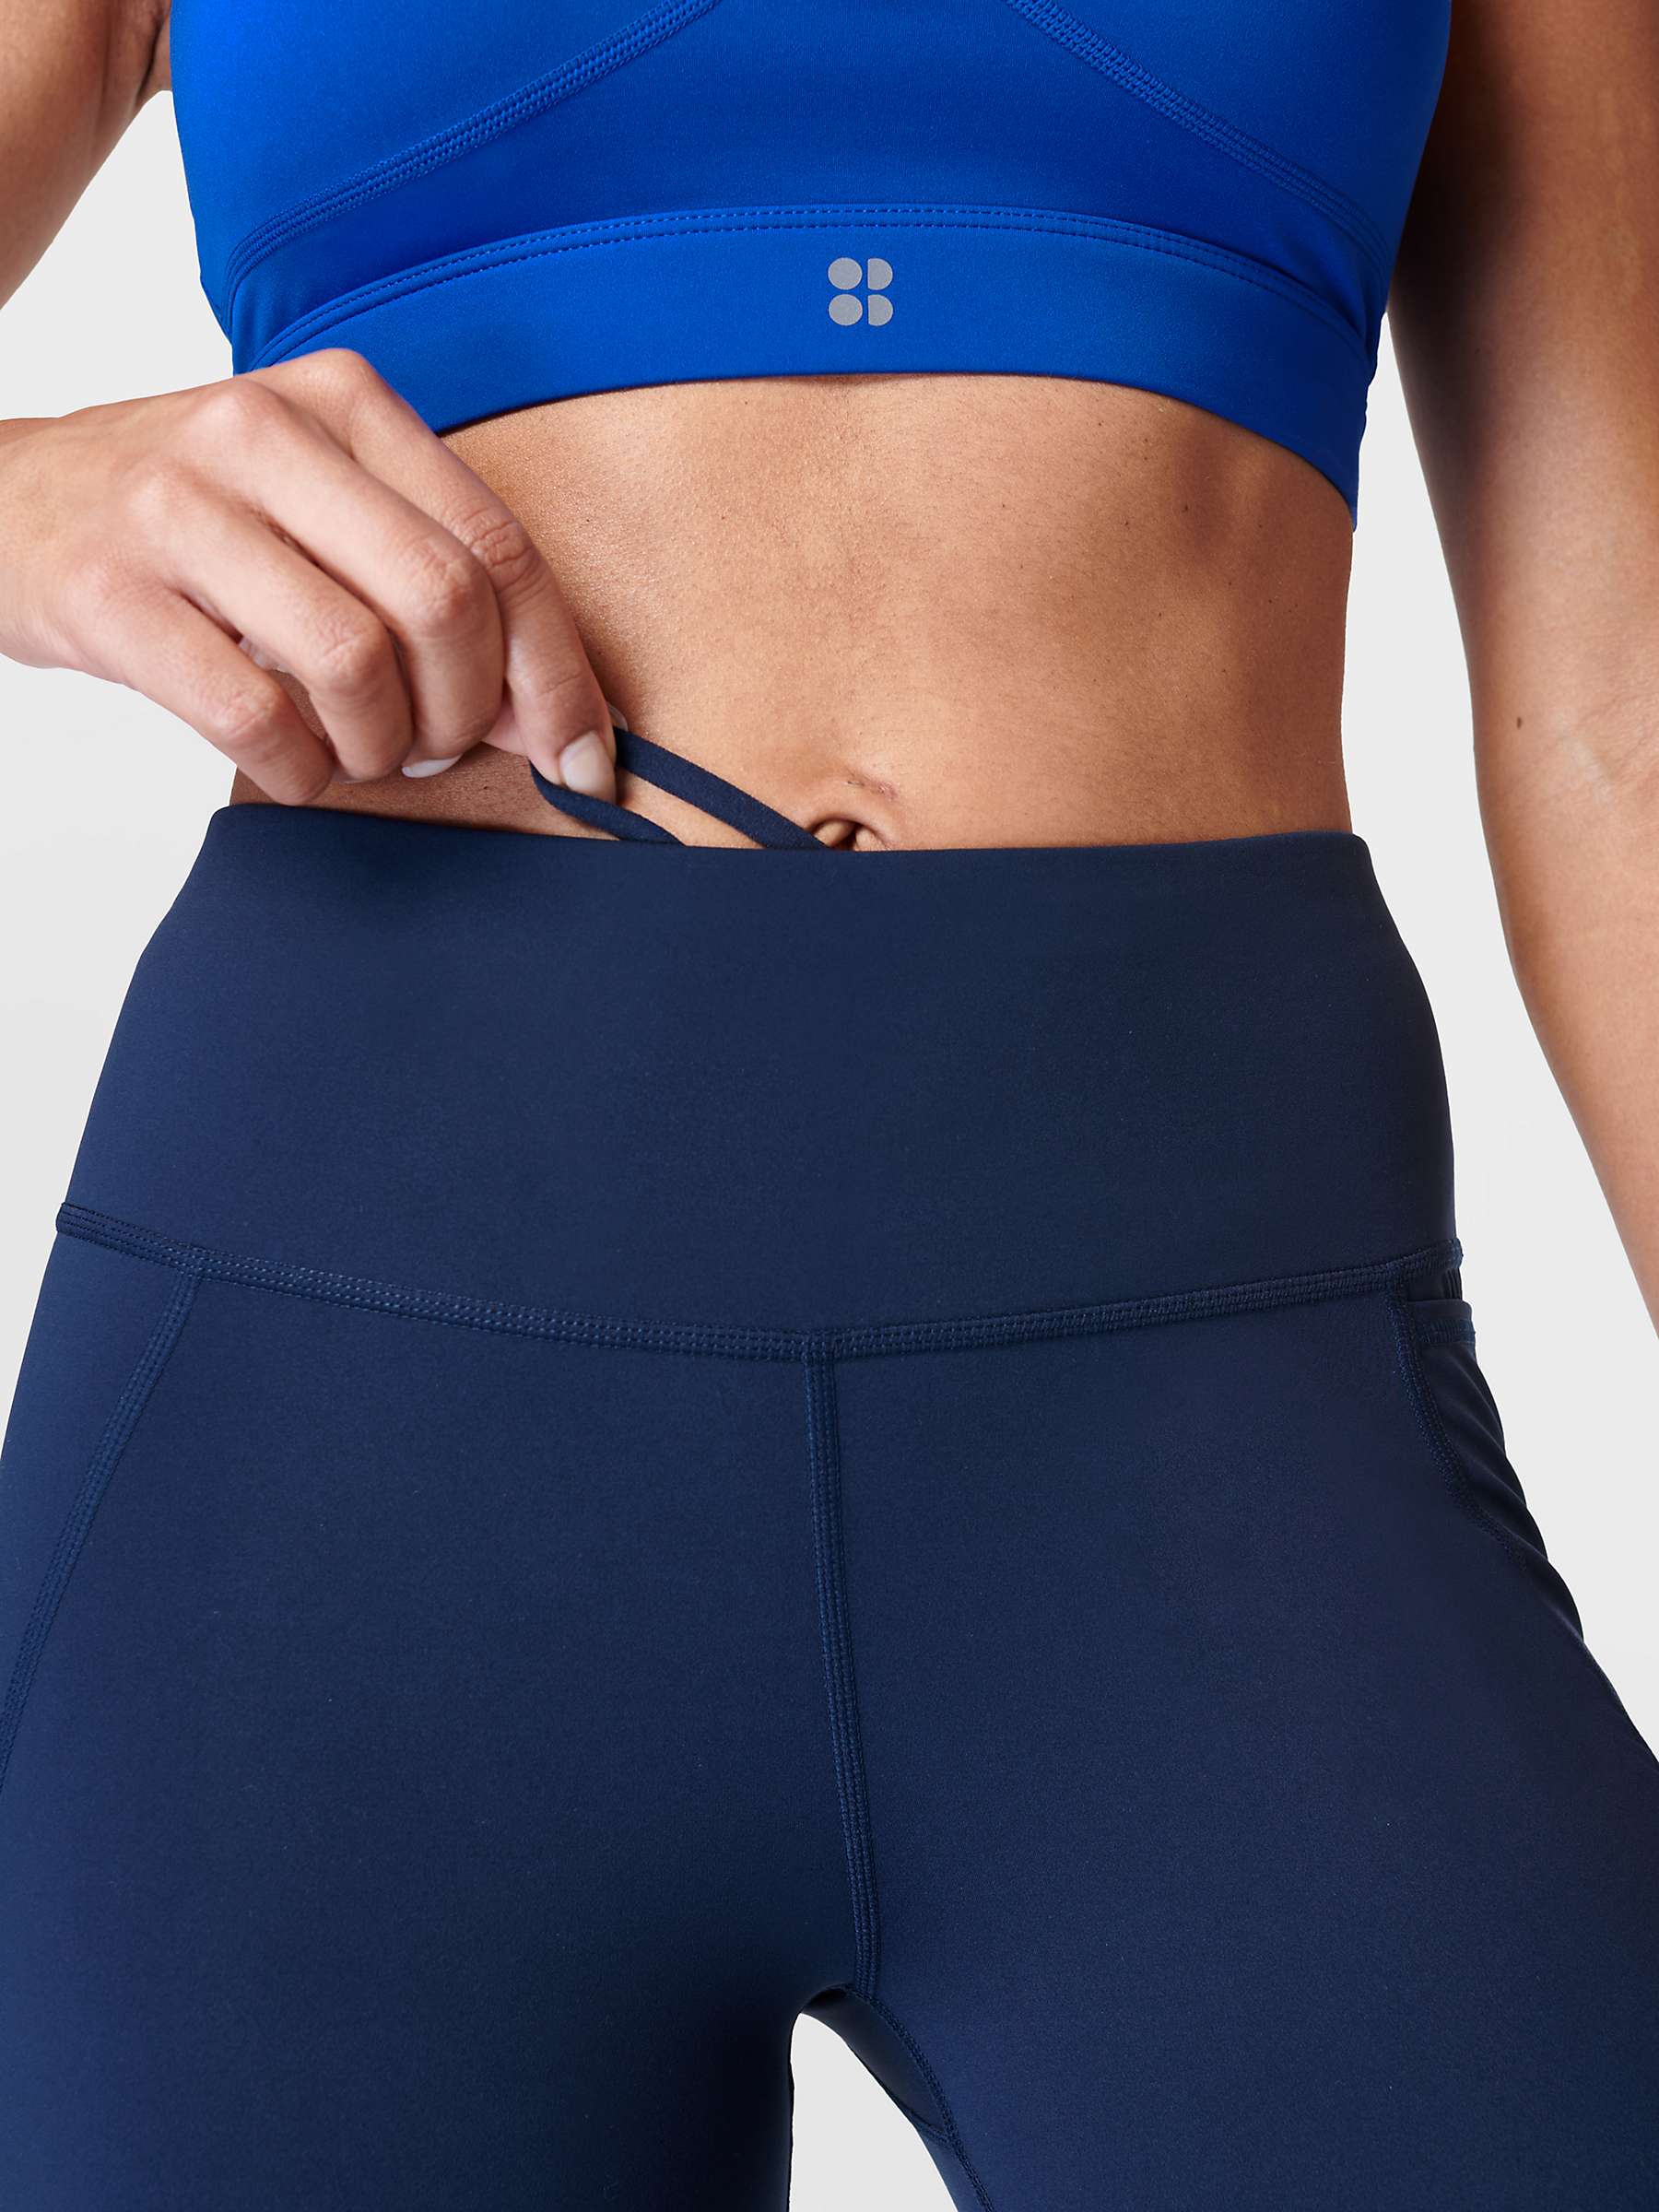 Buy Sweaty Betty Power 7/8 Workout Colour Curve Leggings, Lightning Blue/Navy Online at johnlewis.com